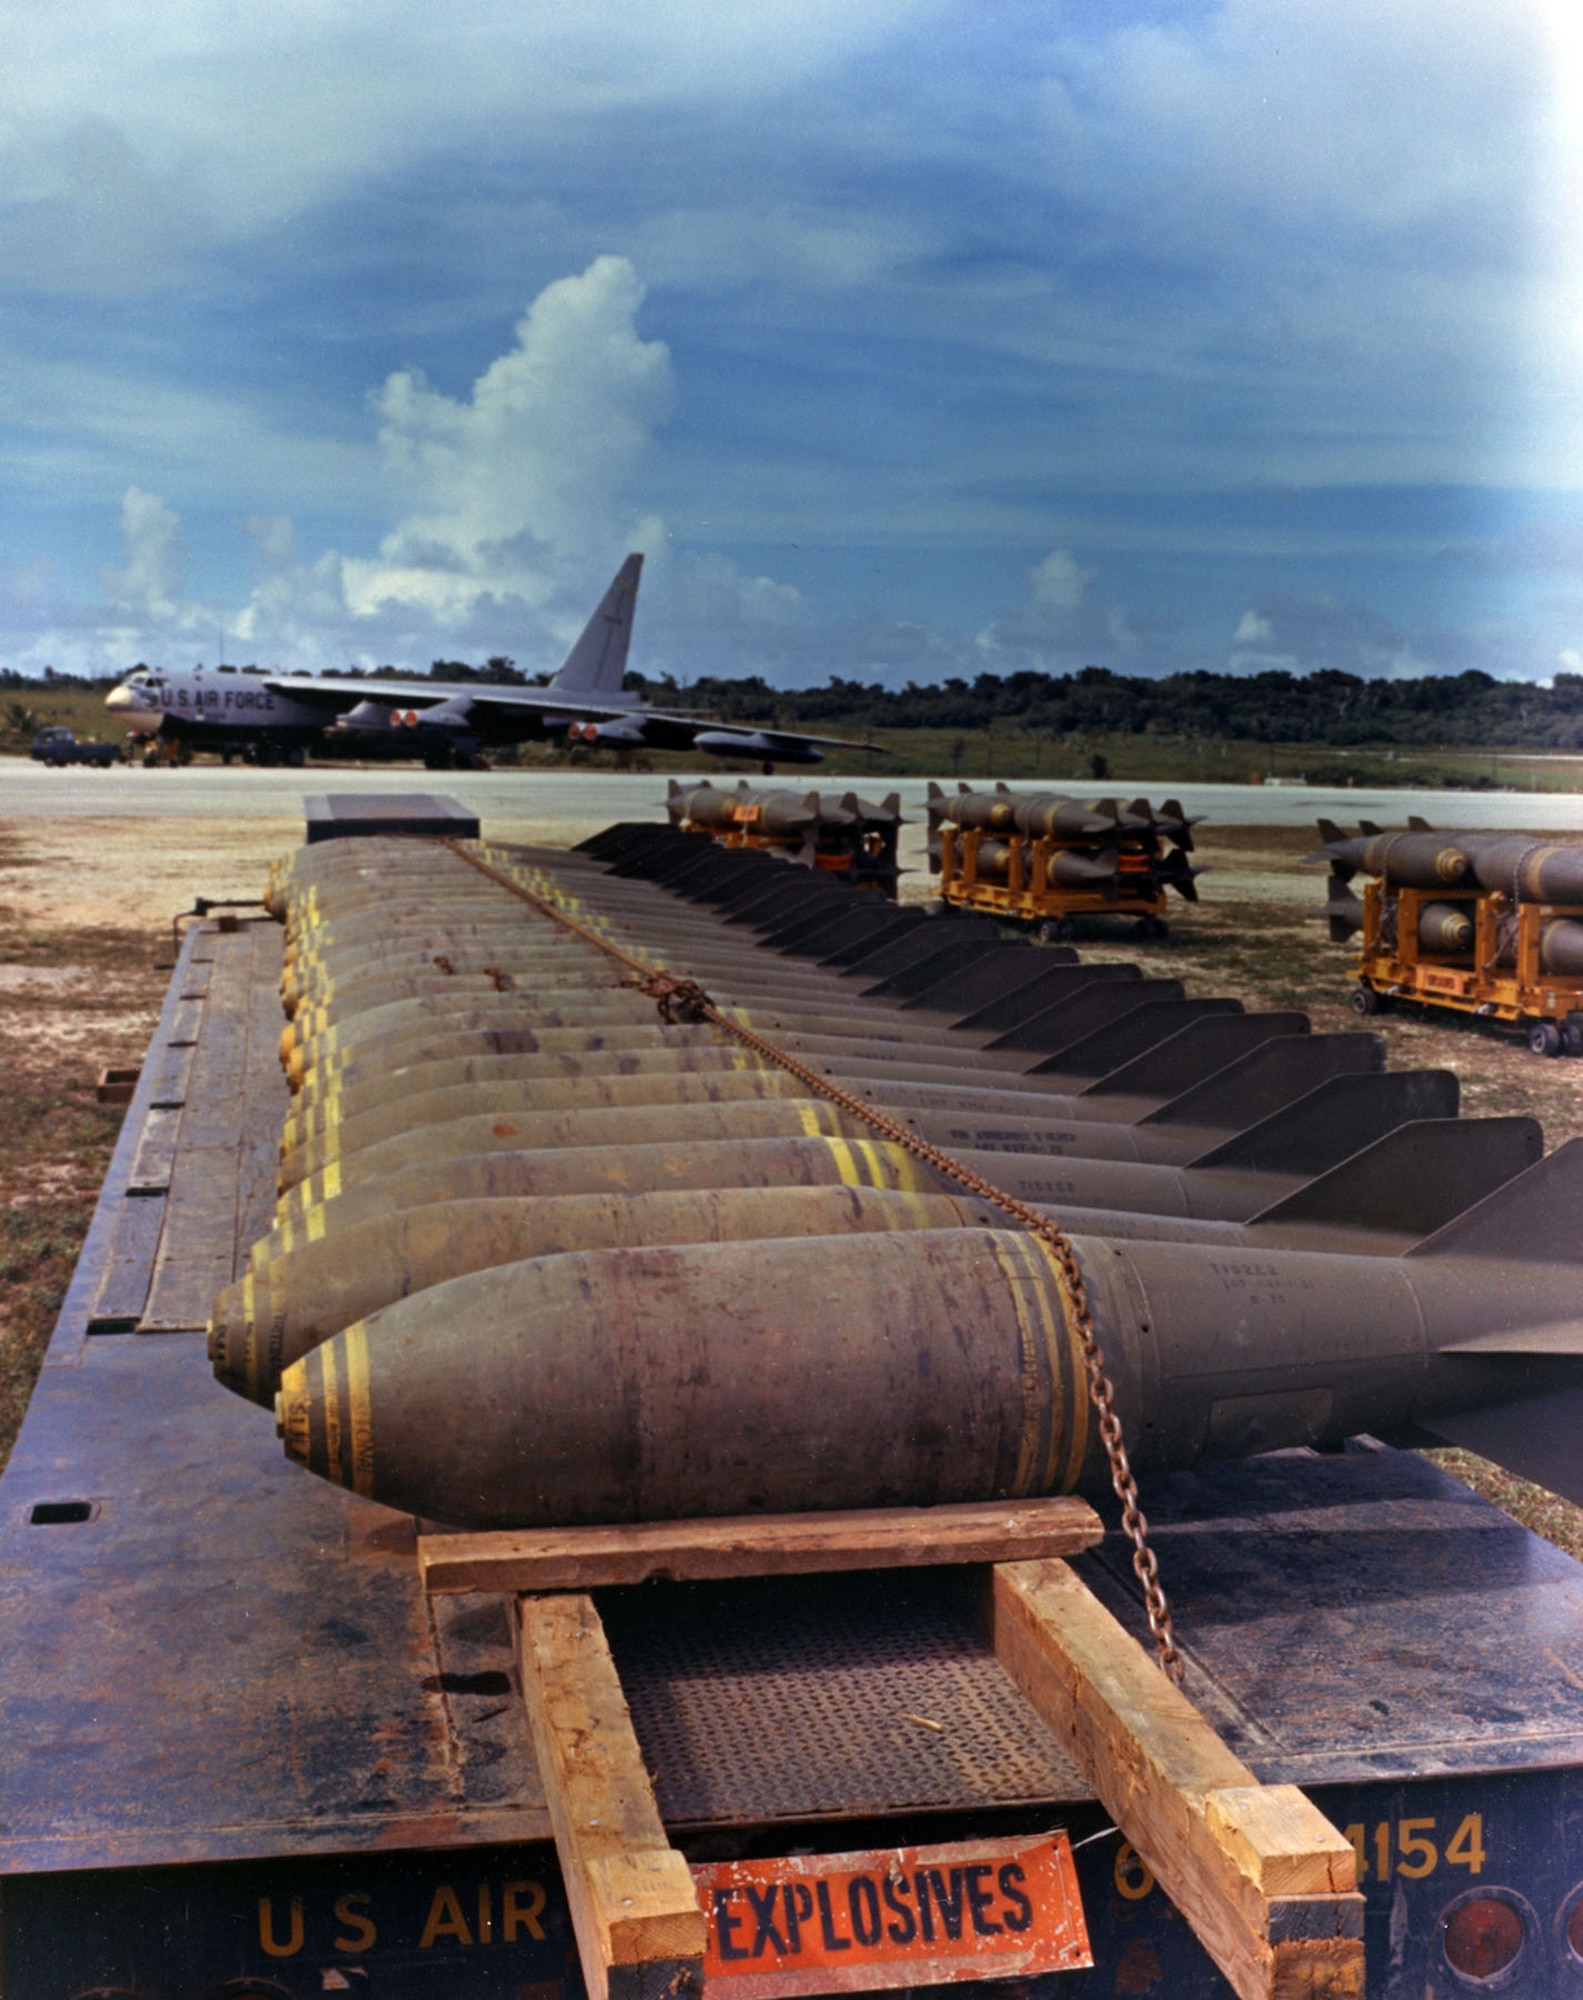 Bombs without fuses ready to be loaded onto the B-52 in the background. (U.S. Air Force photo)